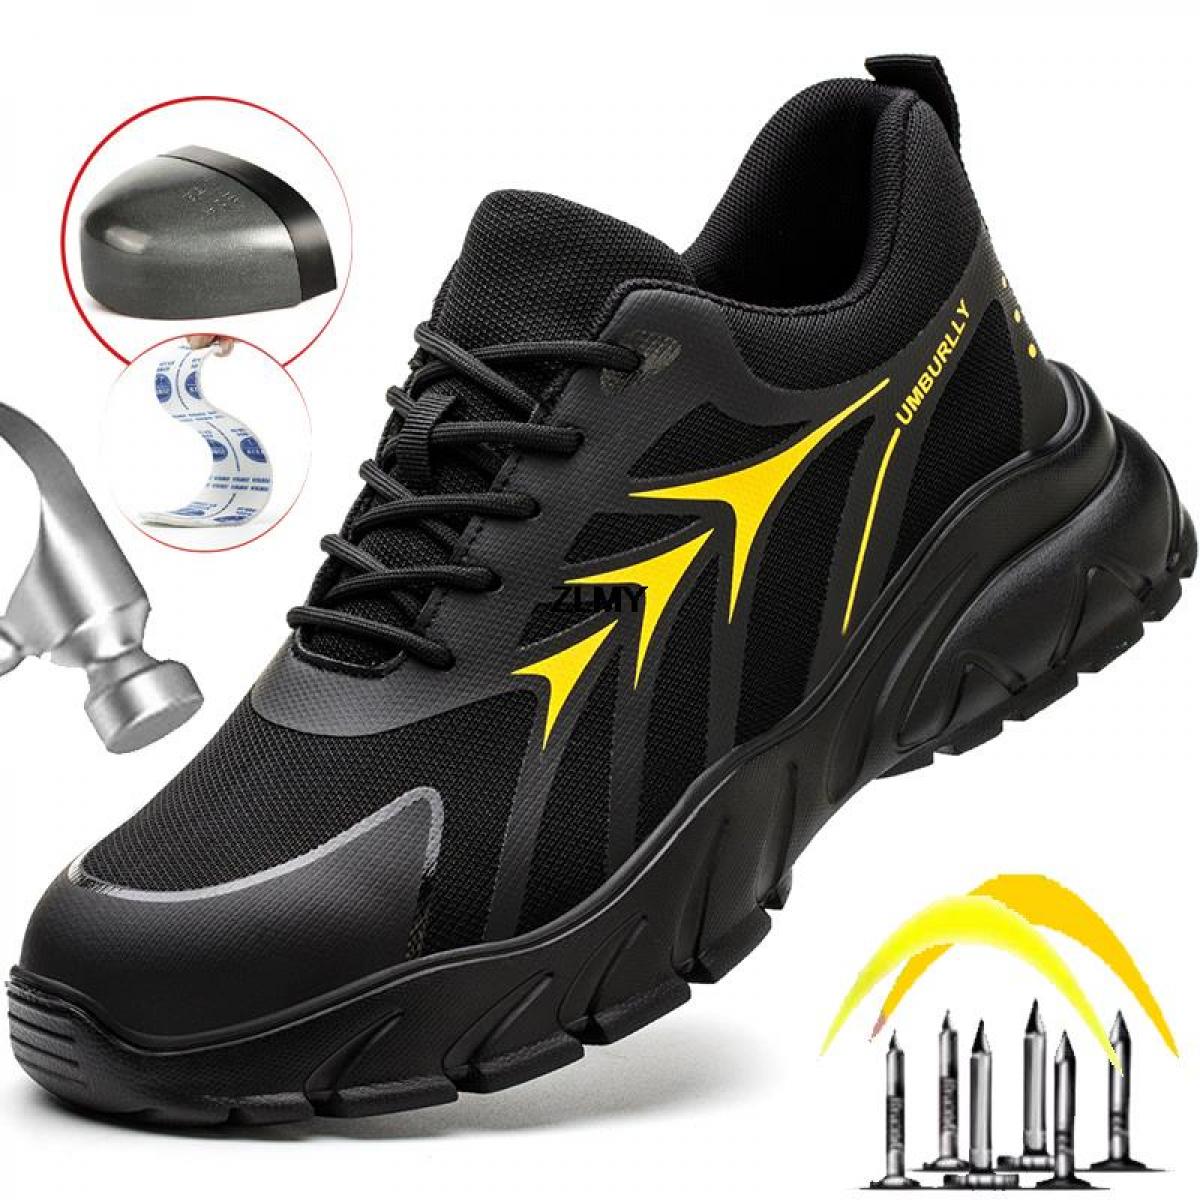 Men's Safety Shoes Fashion Sneaker With Steel Toe Cap Work Shoes Anti Smash Anti Puncture Man Work Safety Boots New Cons